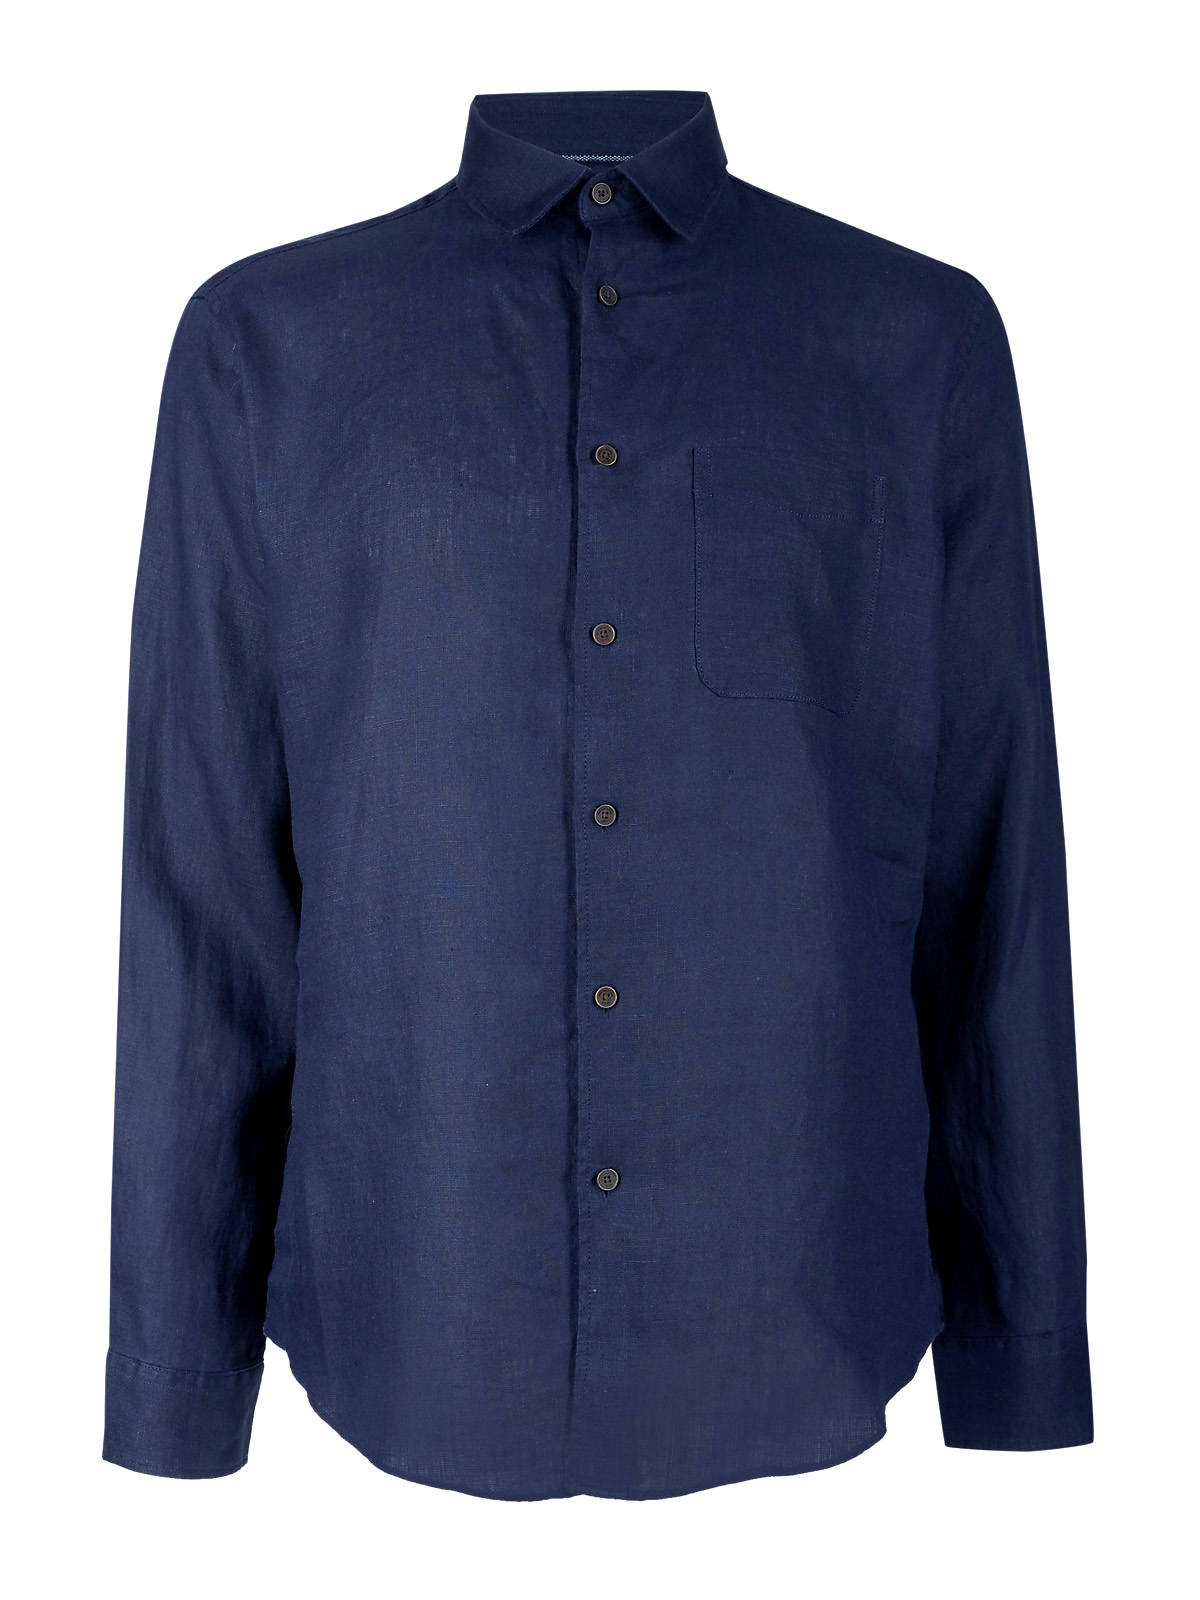 Marks and Spencer - - M&5 NAVY Mens Pure Linen Shirt with Pocket - Size ...